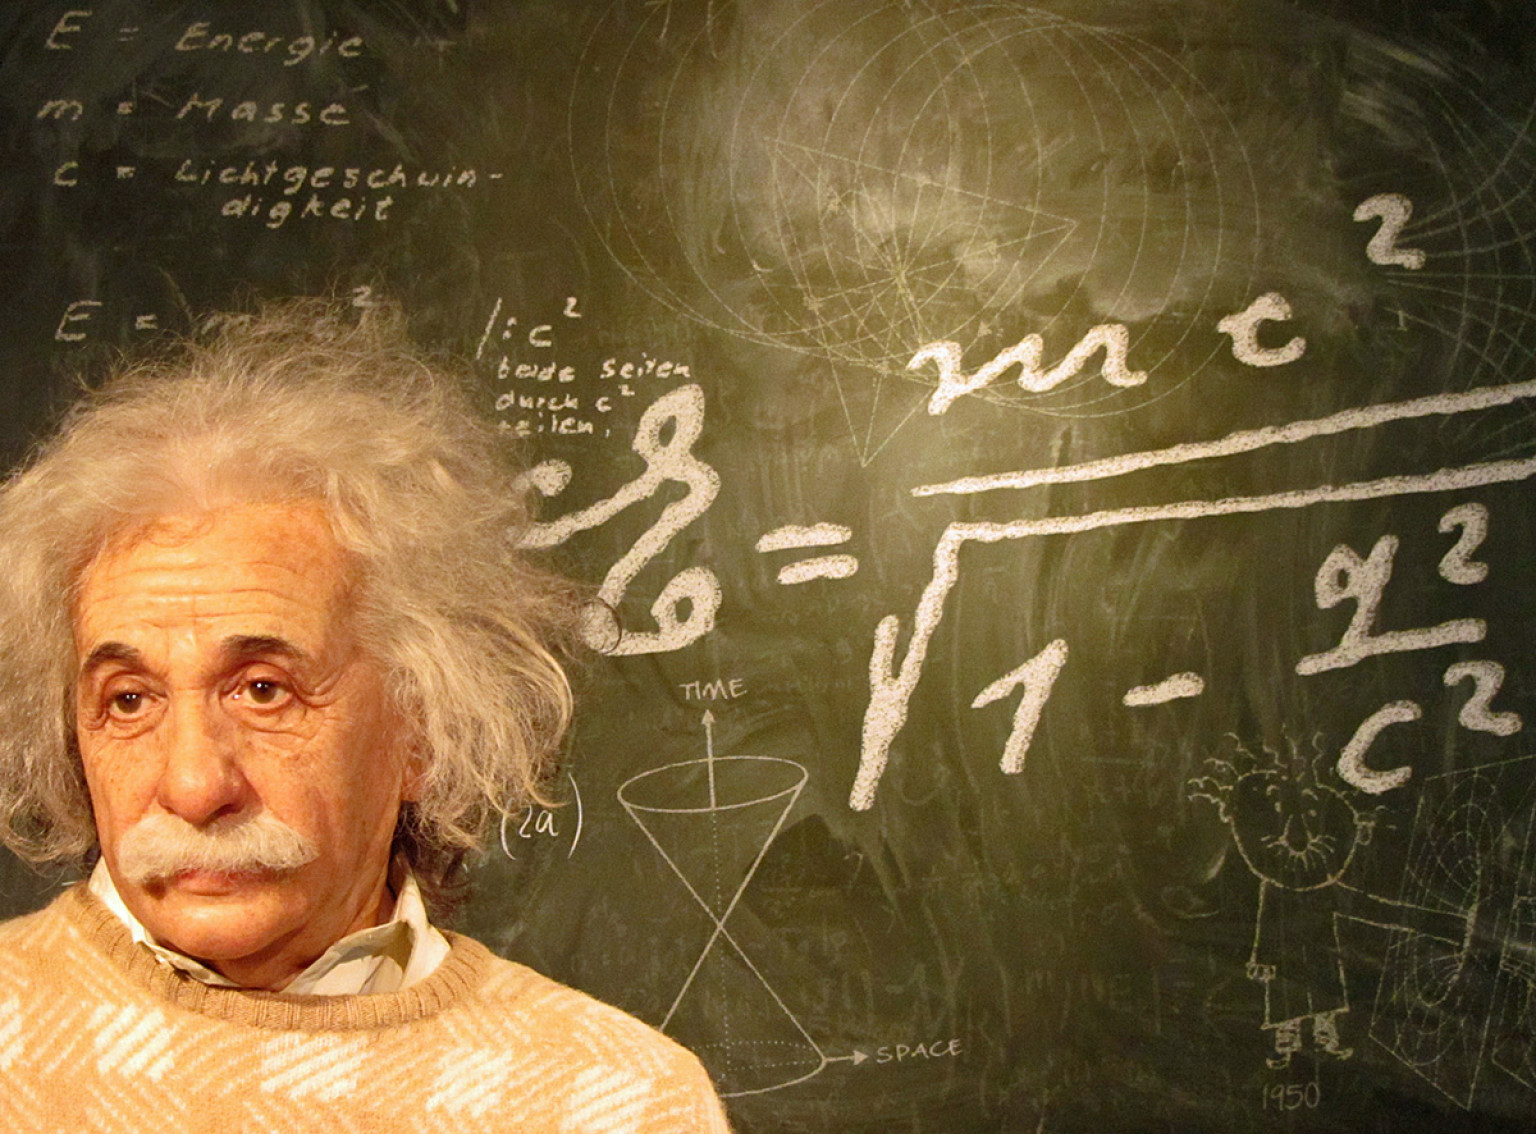 🔭 Are You Intelligent Enough to Pass This Challenging Science Quiz? Let’s Find Out Albert Einstein